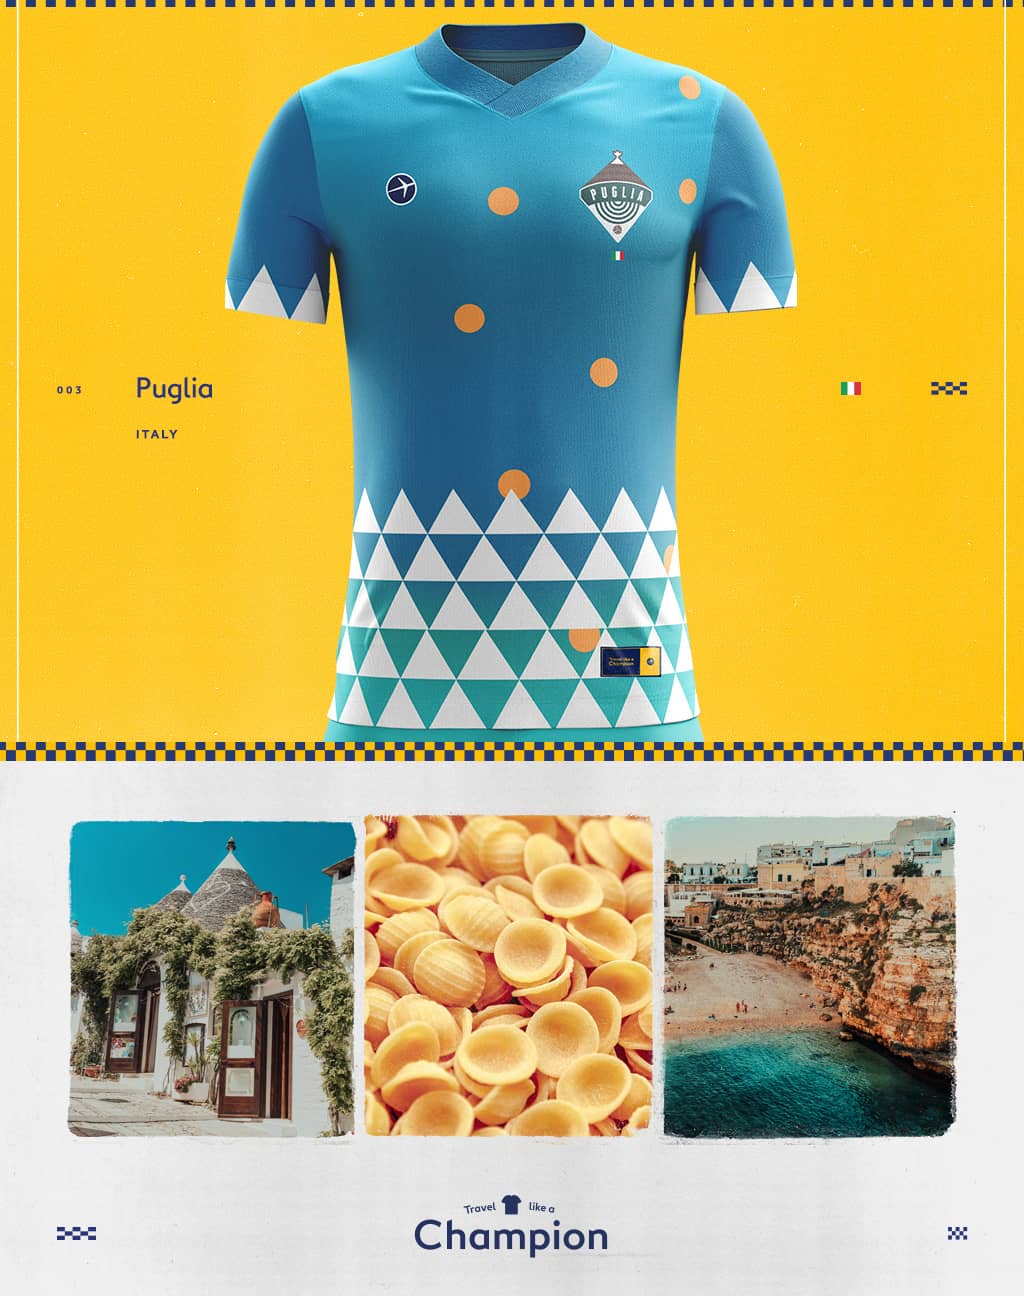 soccer jersey and the scenes in puglia that inspired the design